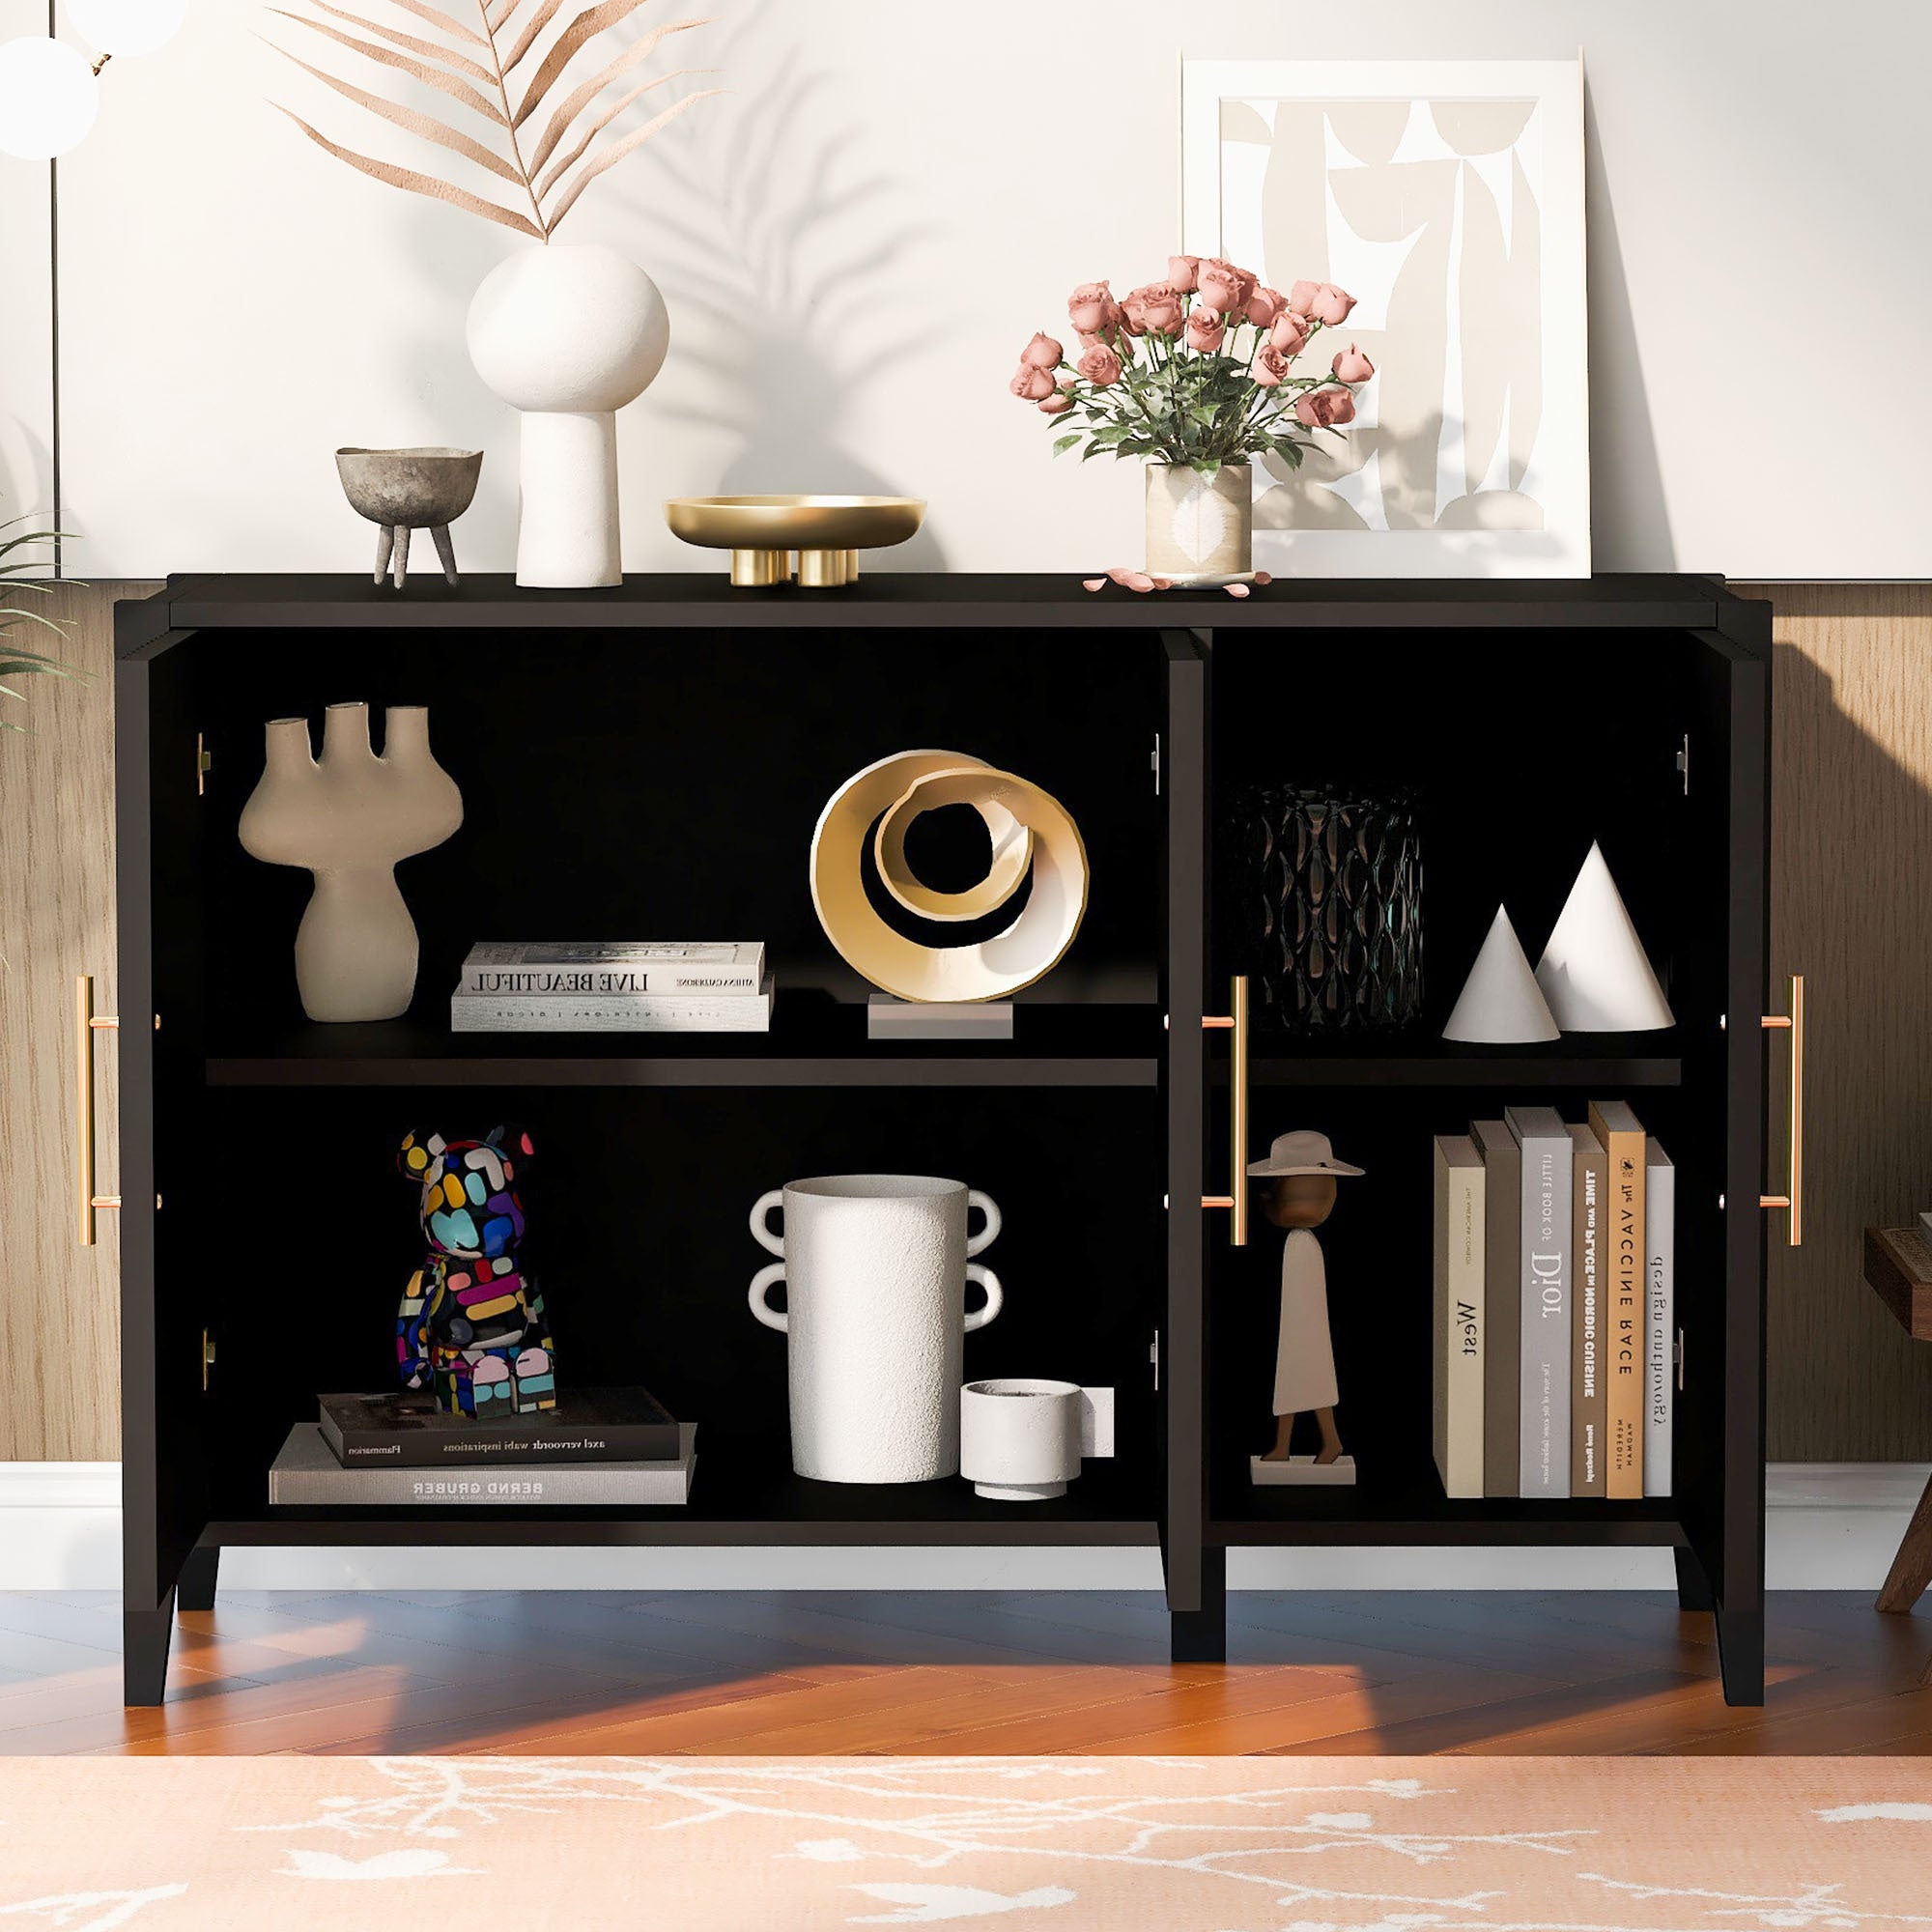 Featured Three door Storage Cabinet with Metal 1-2 shelves-black-primary living space-shelves